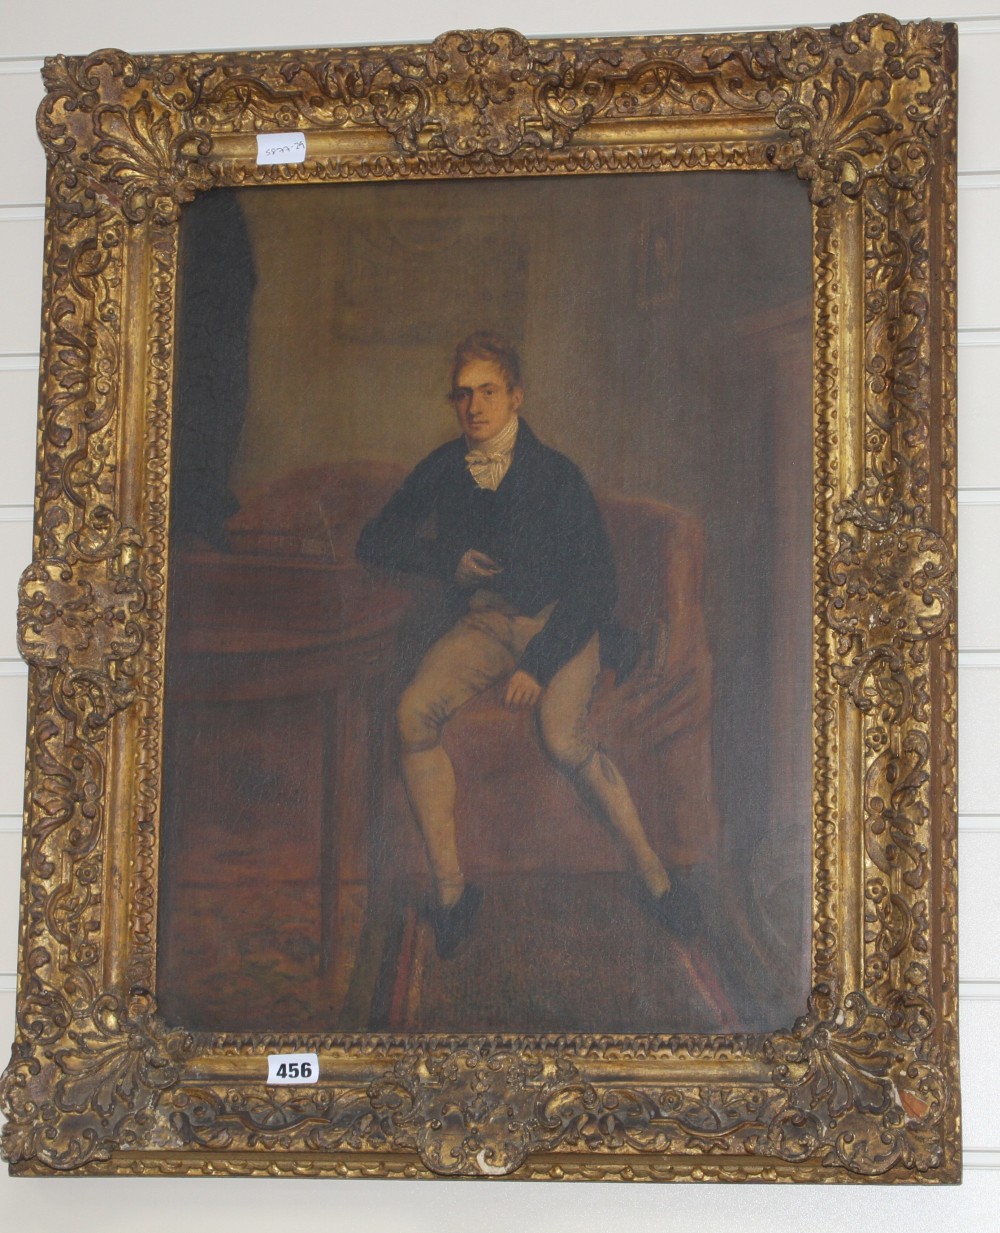 Early 19th century English School, oil on canvas, Full length portrait of a gentleman seated beside a writing slope, 53 x 40cm